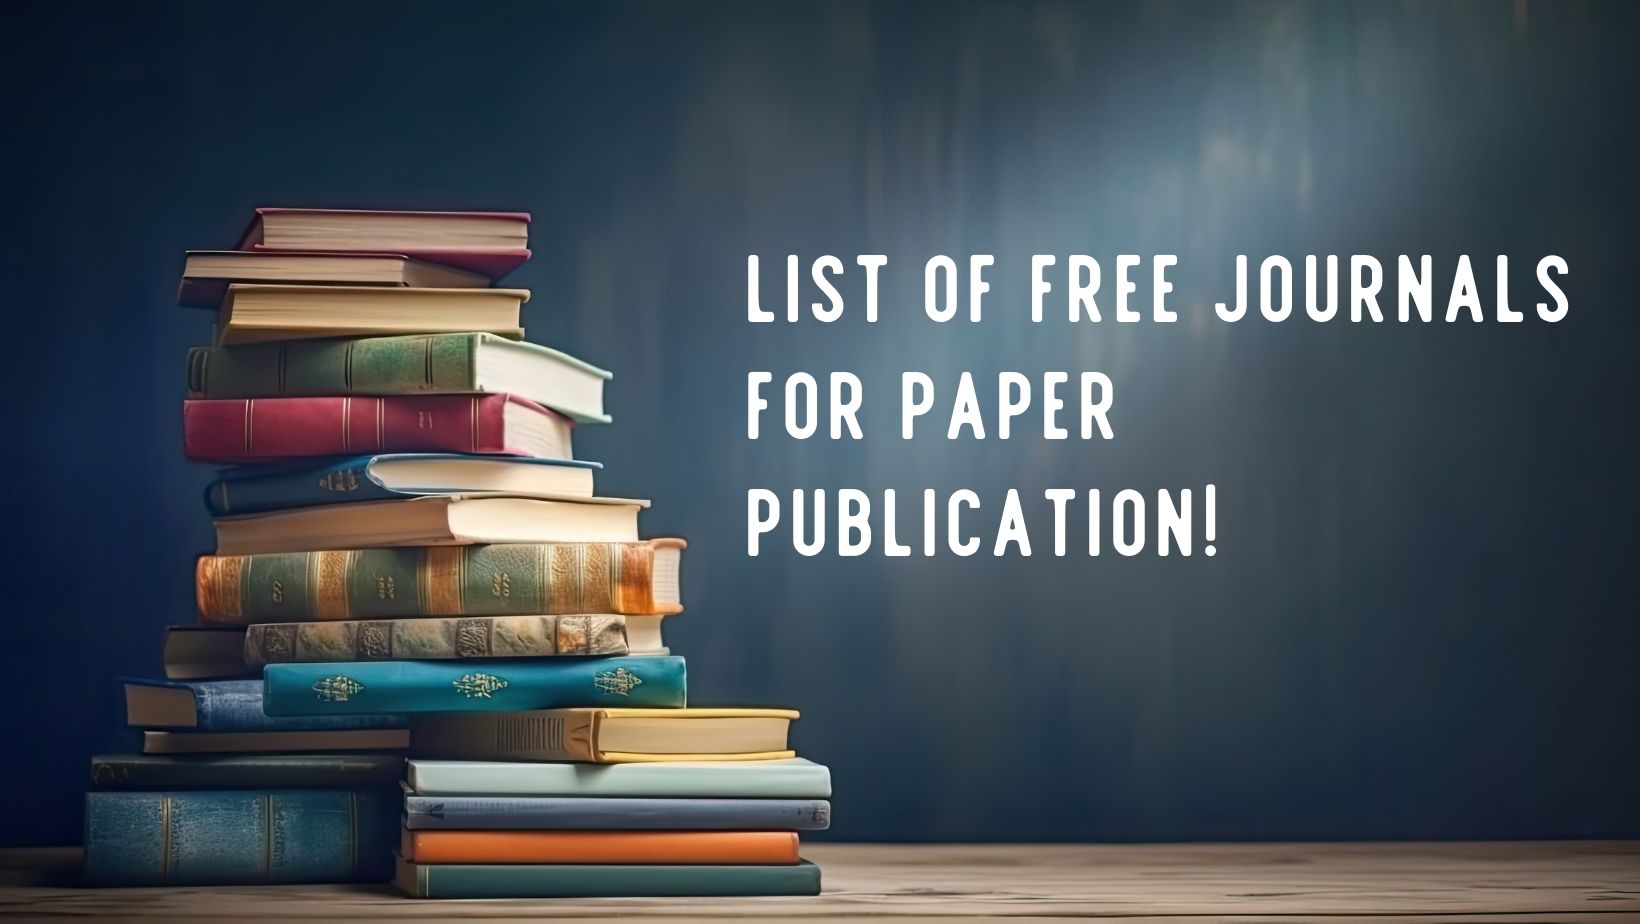 List of Free Journals for Paper Publication!